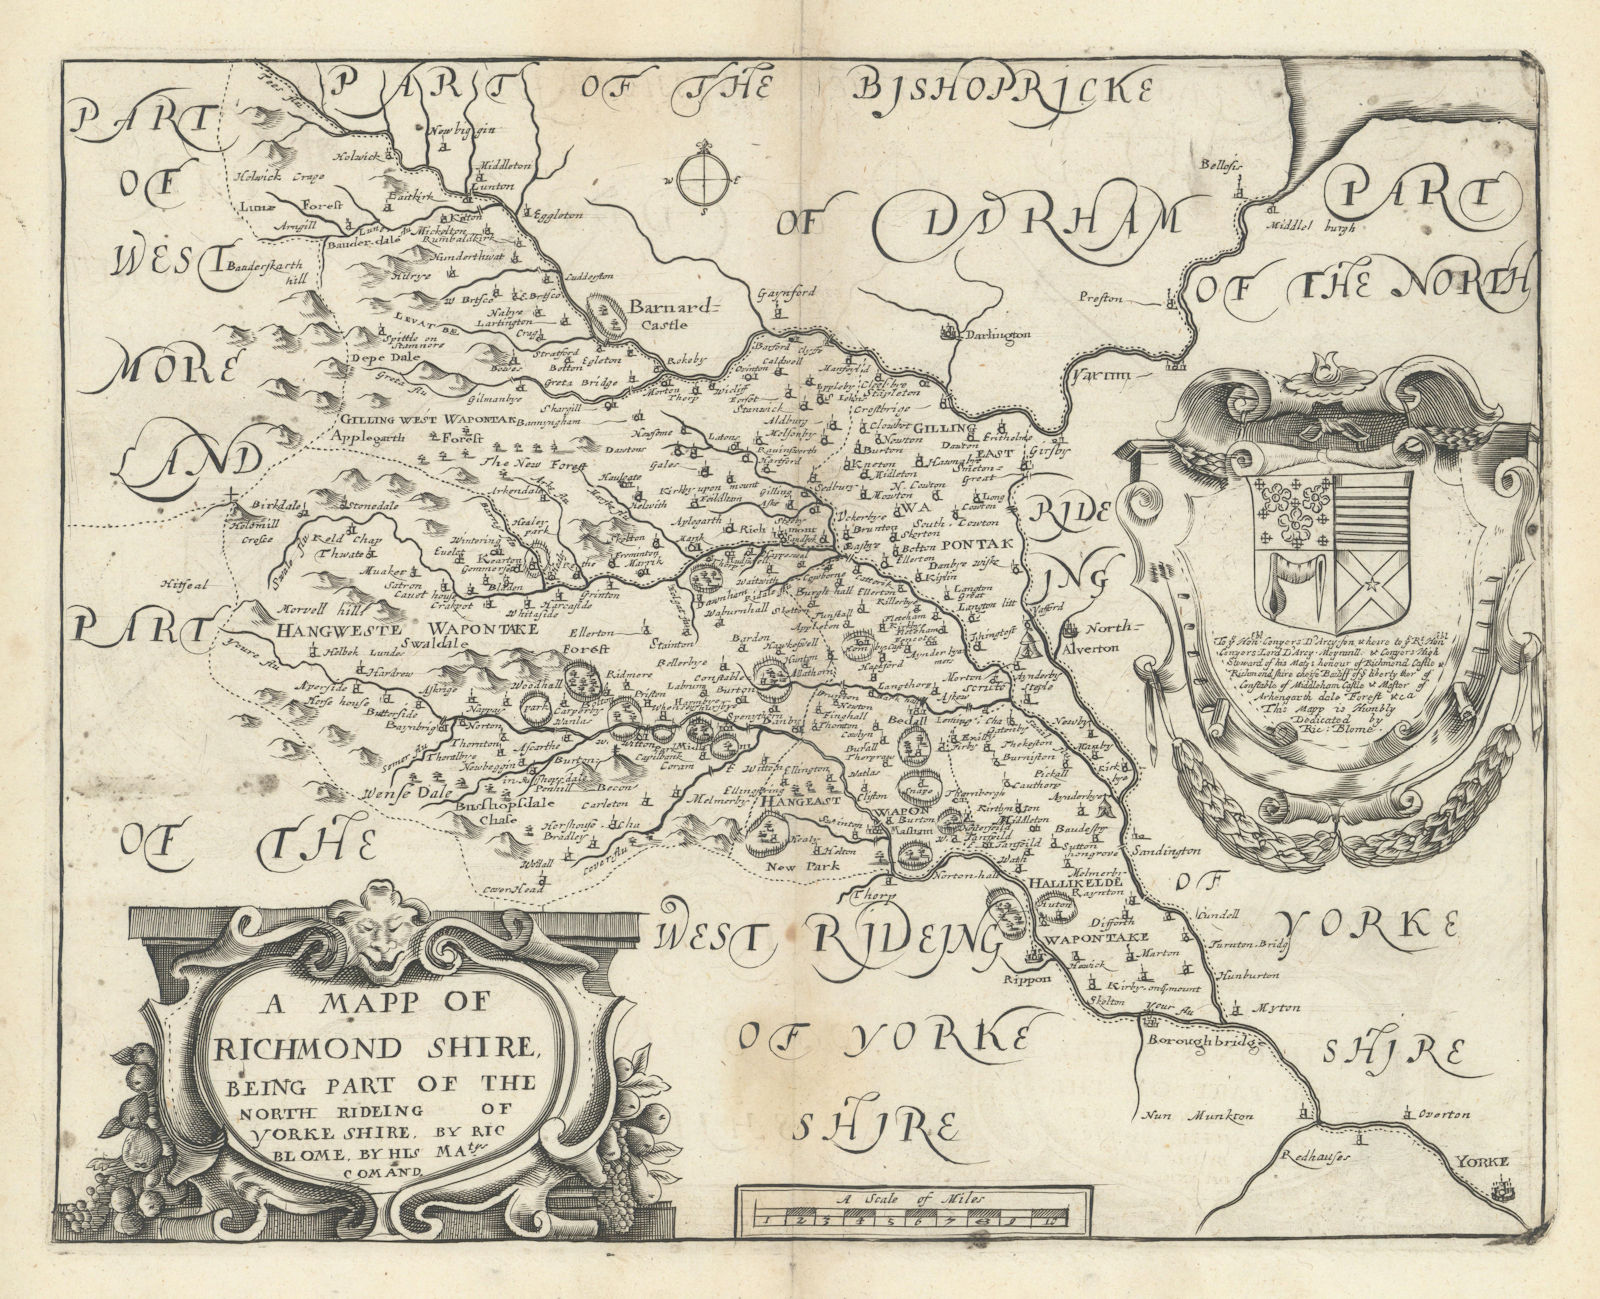 A Mapp of Richmond Shire… Part of the North Rideing of Yorke Shire. BLOME 1673